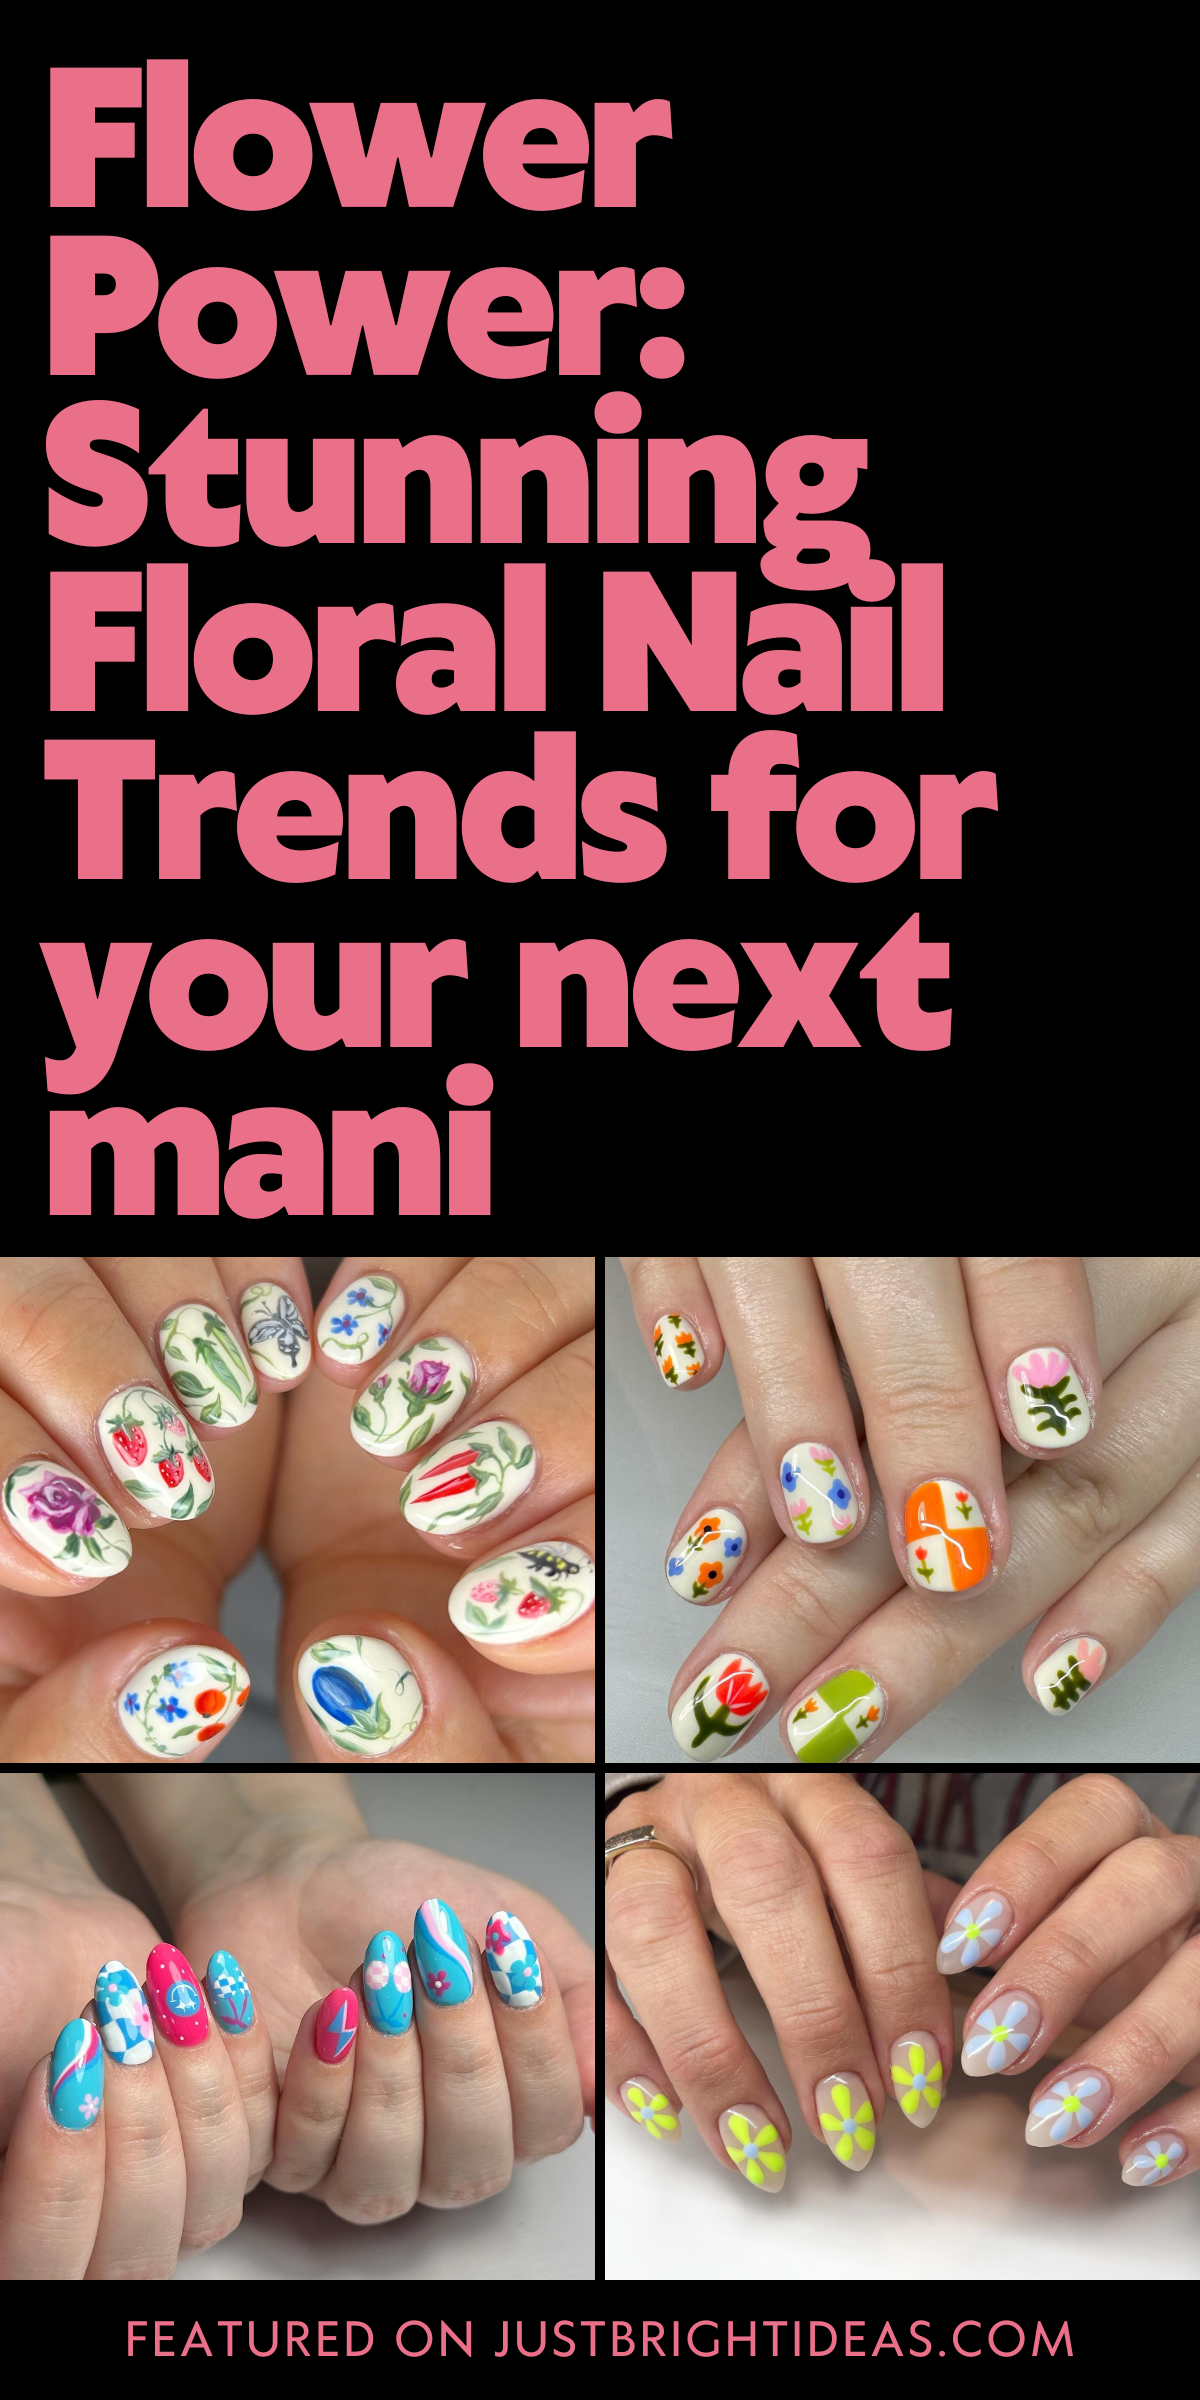 Are your ready to take your manicure game to the next level? We've got just the thing for you - floral nails! 💅🏻🌸 Whether you're a fan of delicate blooms or bold botanicals, we've curated a collection of stunning floral nail ideas that will have you feeling like a garden goddess. Get your nails ready to bloom with these trendy and oh-so-chic designs. 🌺